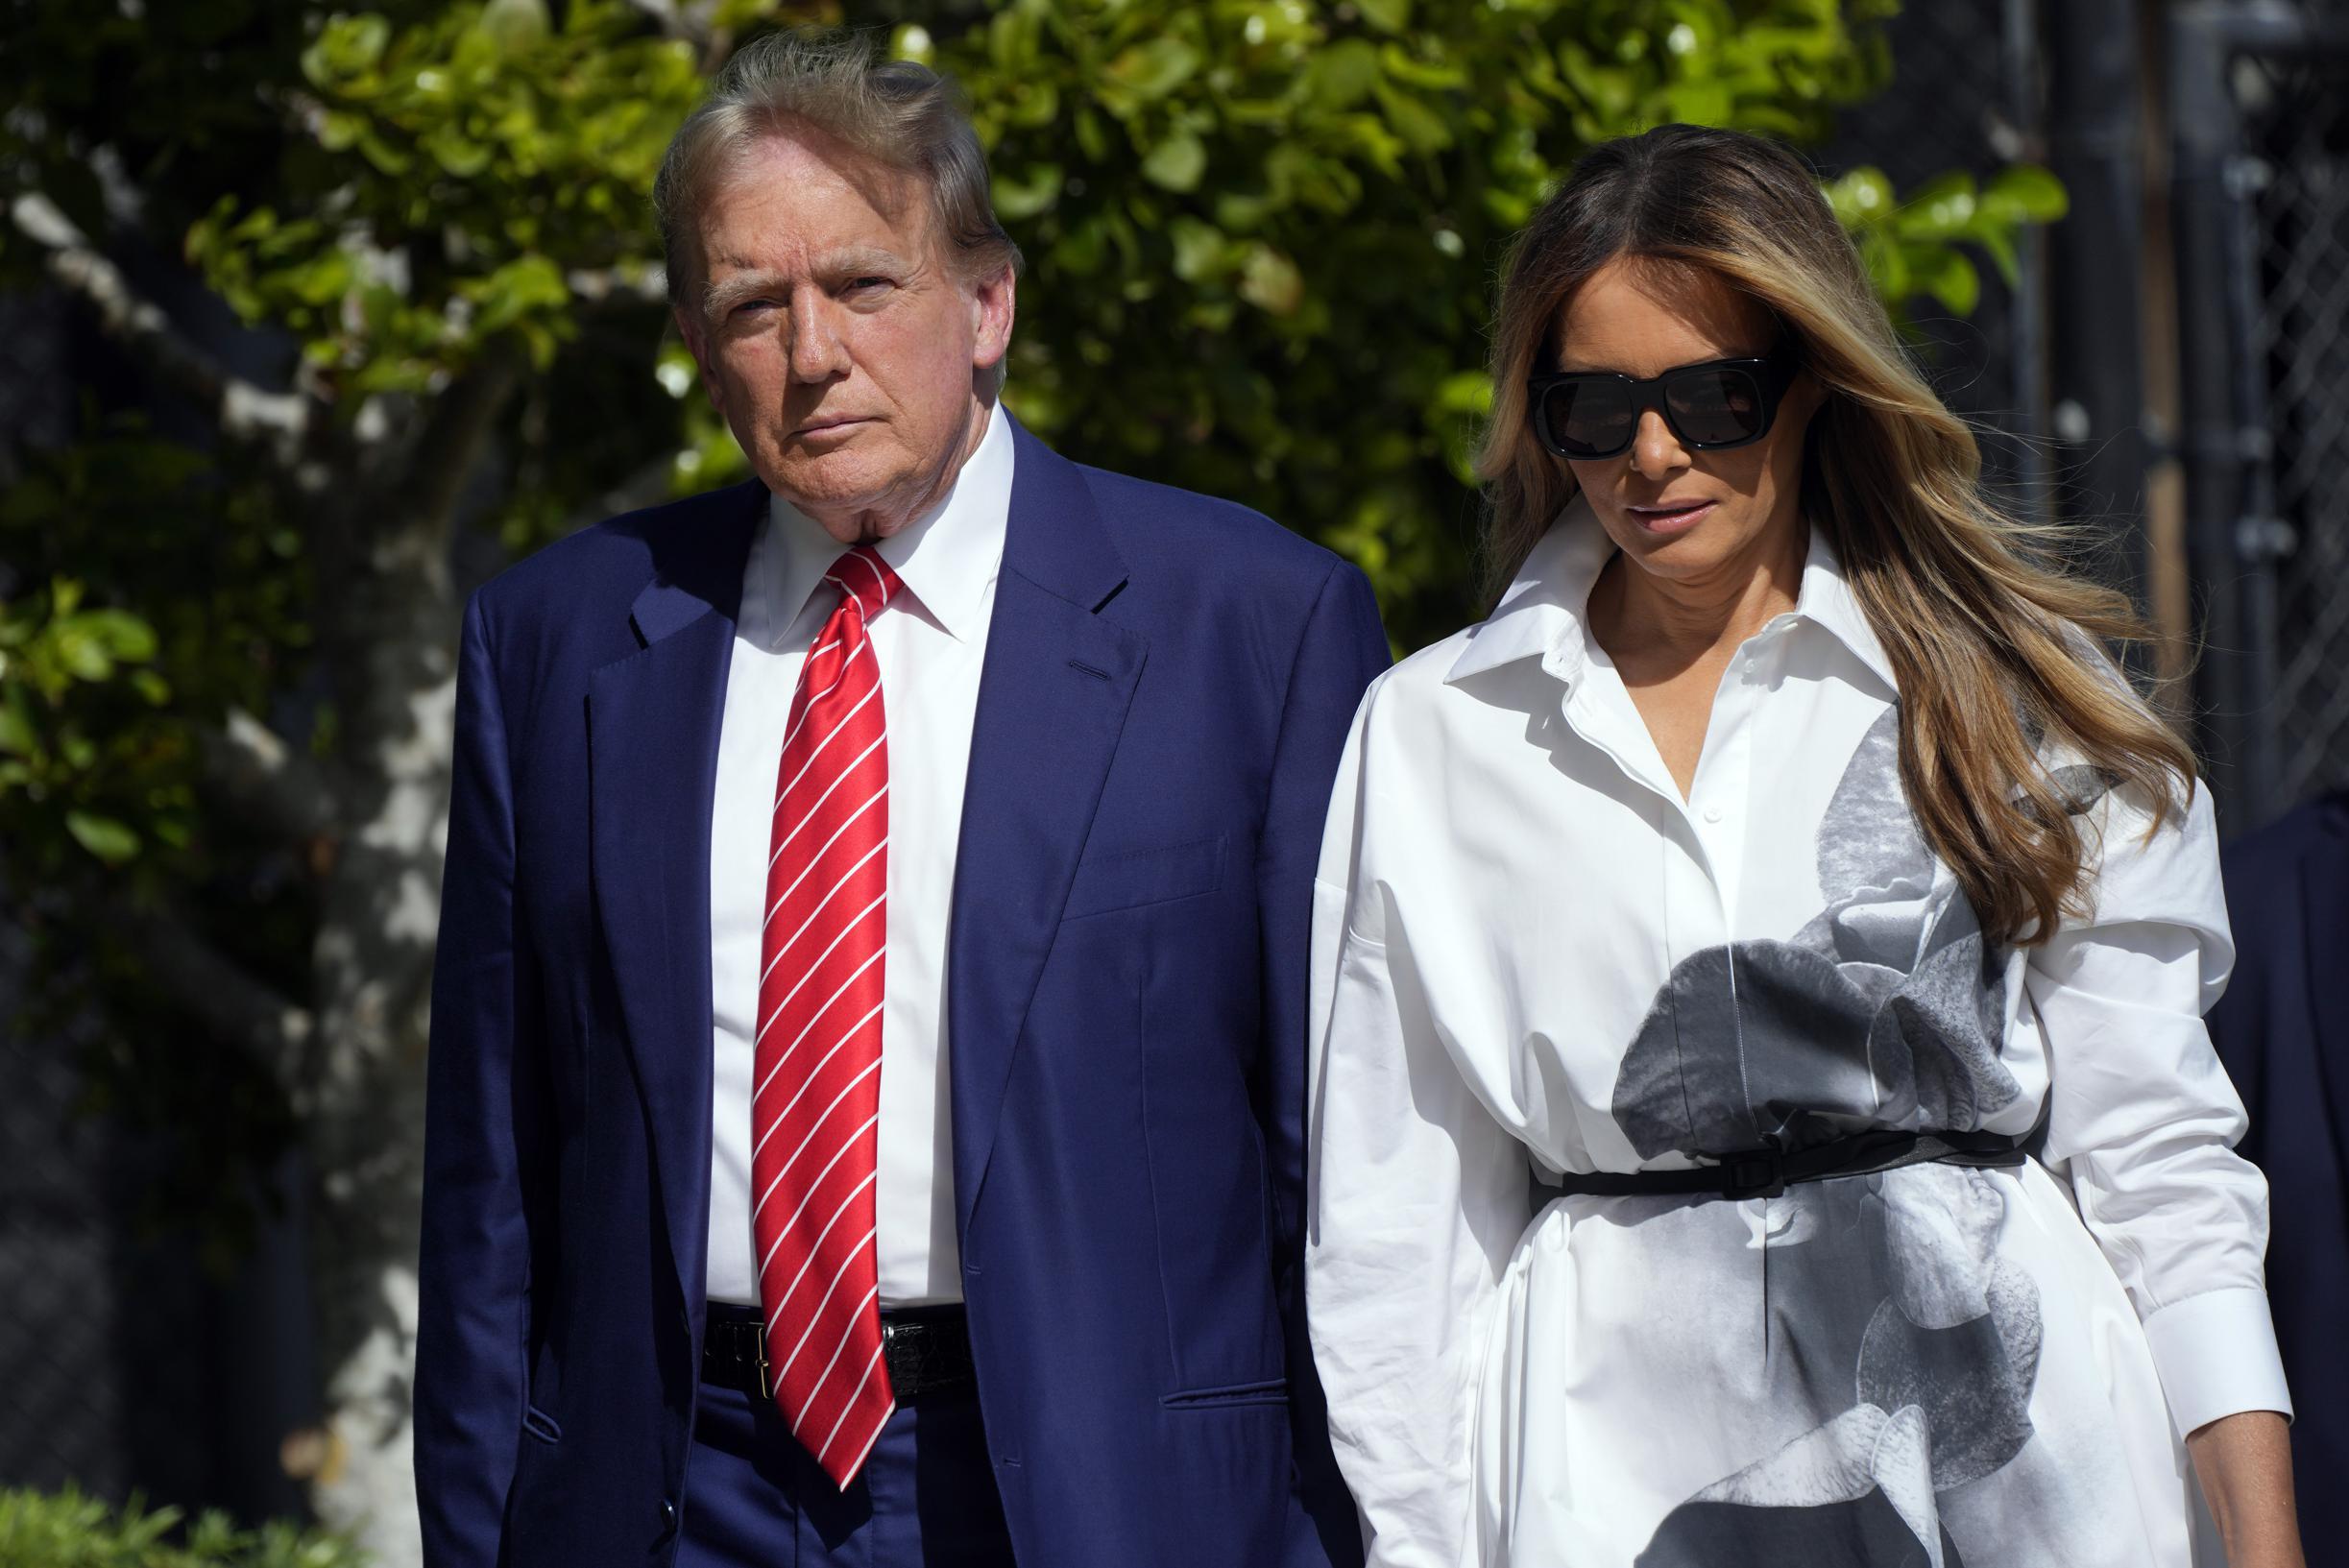 Melania Trump reemerges after weeks out of the spotlight